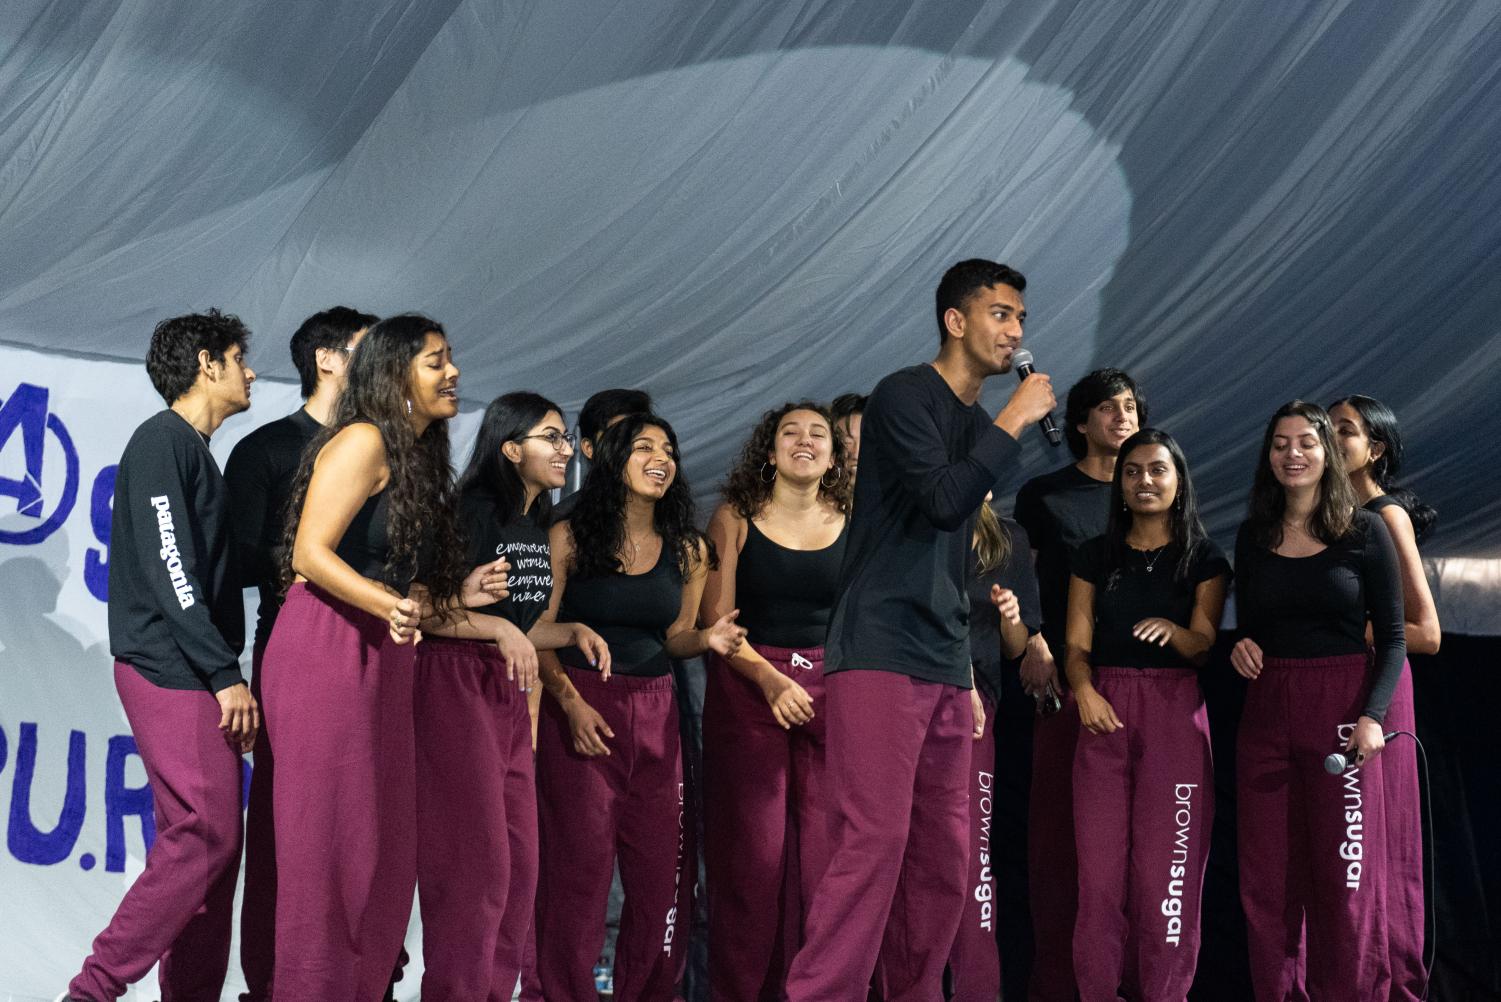 A group of people dance onstage wearing black shirts and maroon pants.